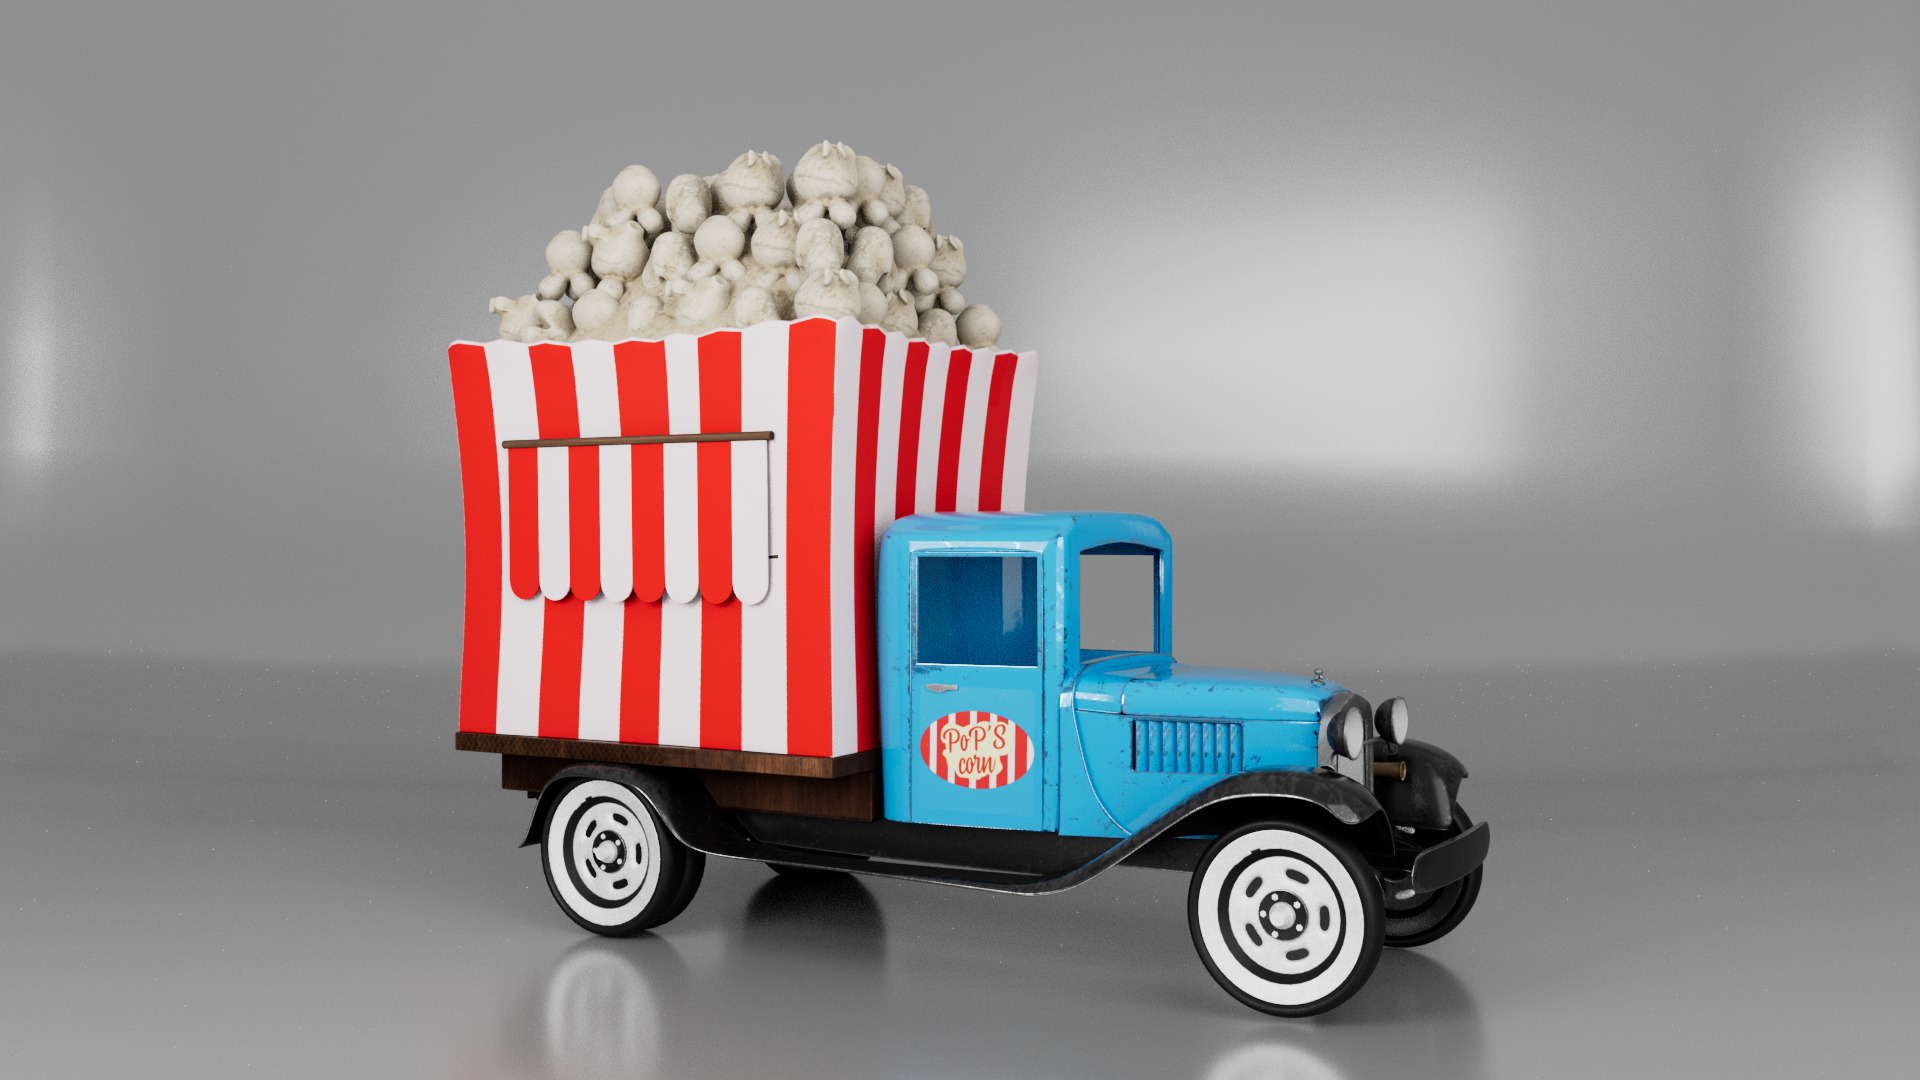 Pop's Corn: A Food Truck Story / 3D render of Pop's popcorn food truck for "Pop's Corn: A Food Truck Story", a developing animated short created using Maya, Substance Painter, Procreate, Premiere Pro, AterEffects, and Illustrator.